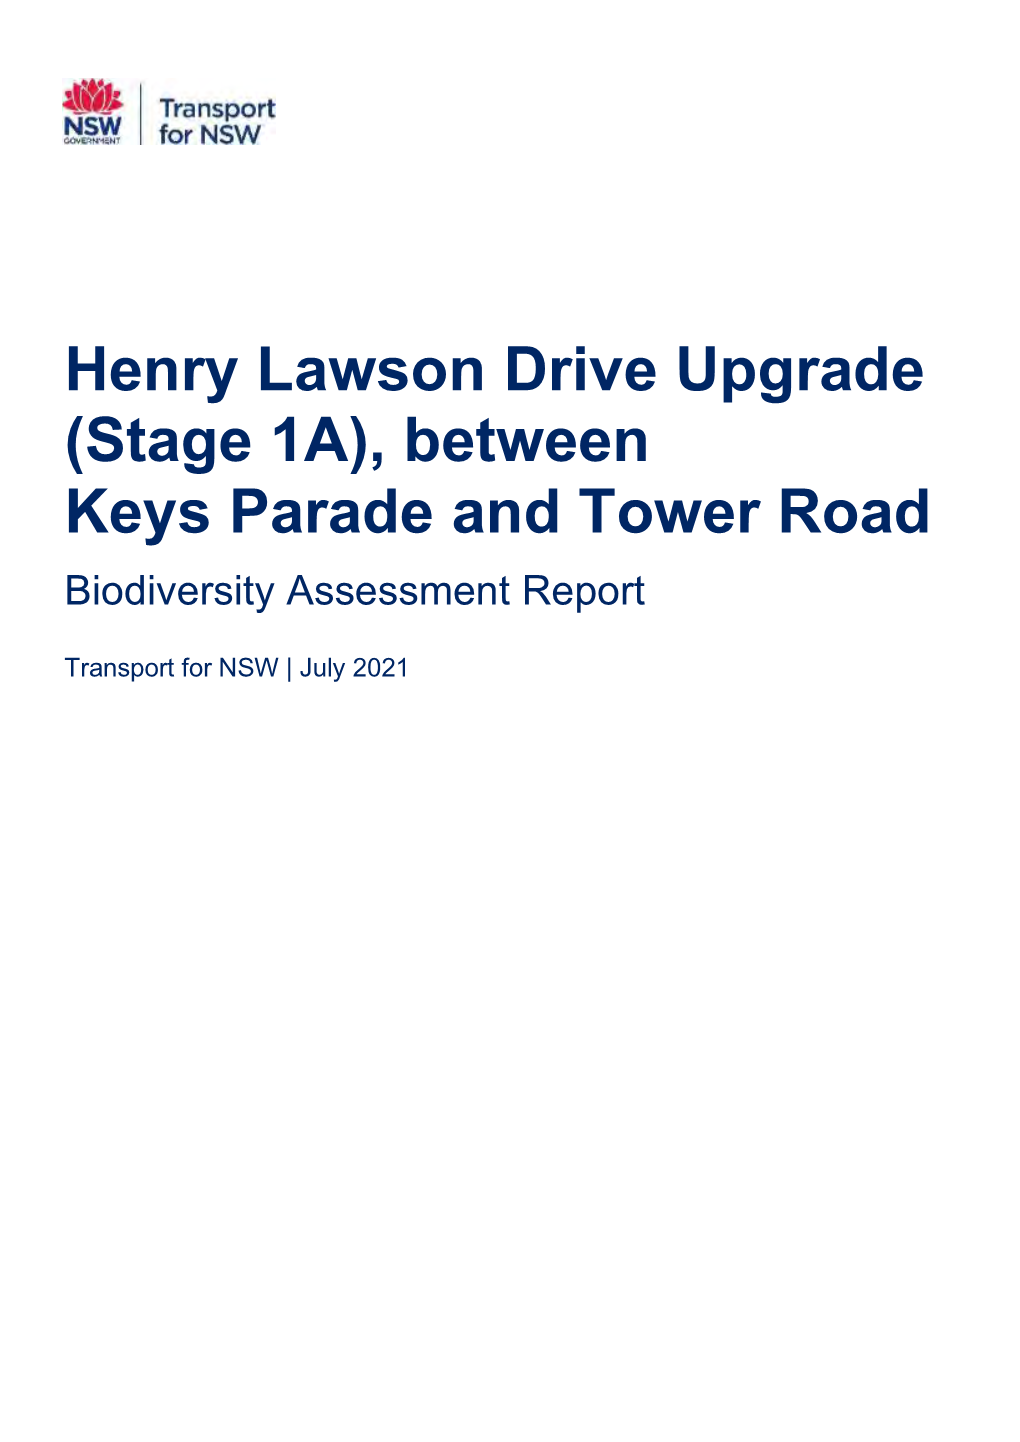 Henry Lawson Drive Upgrade (Stage 1A), Between Keys Parade and Tower Road Biodiversity Assessment Report